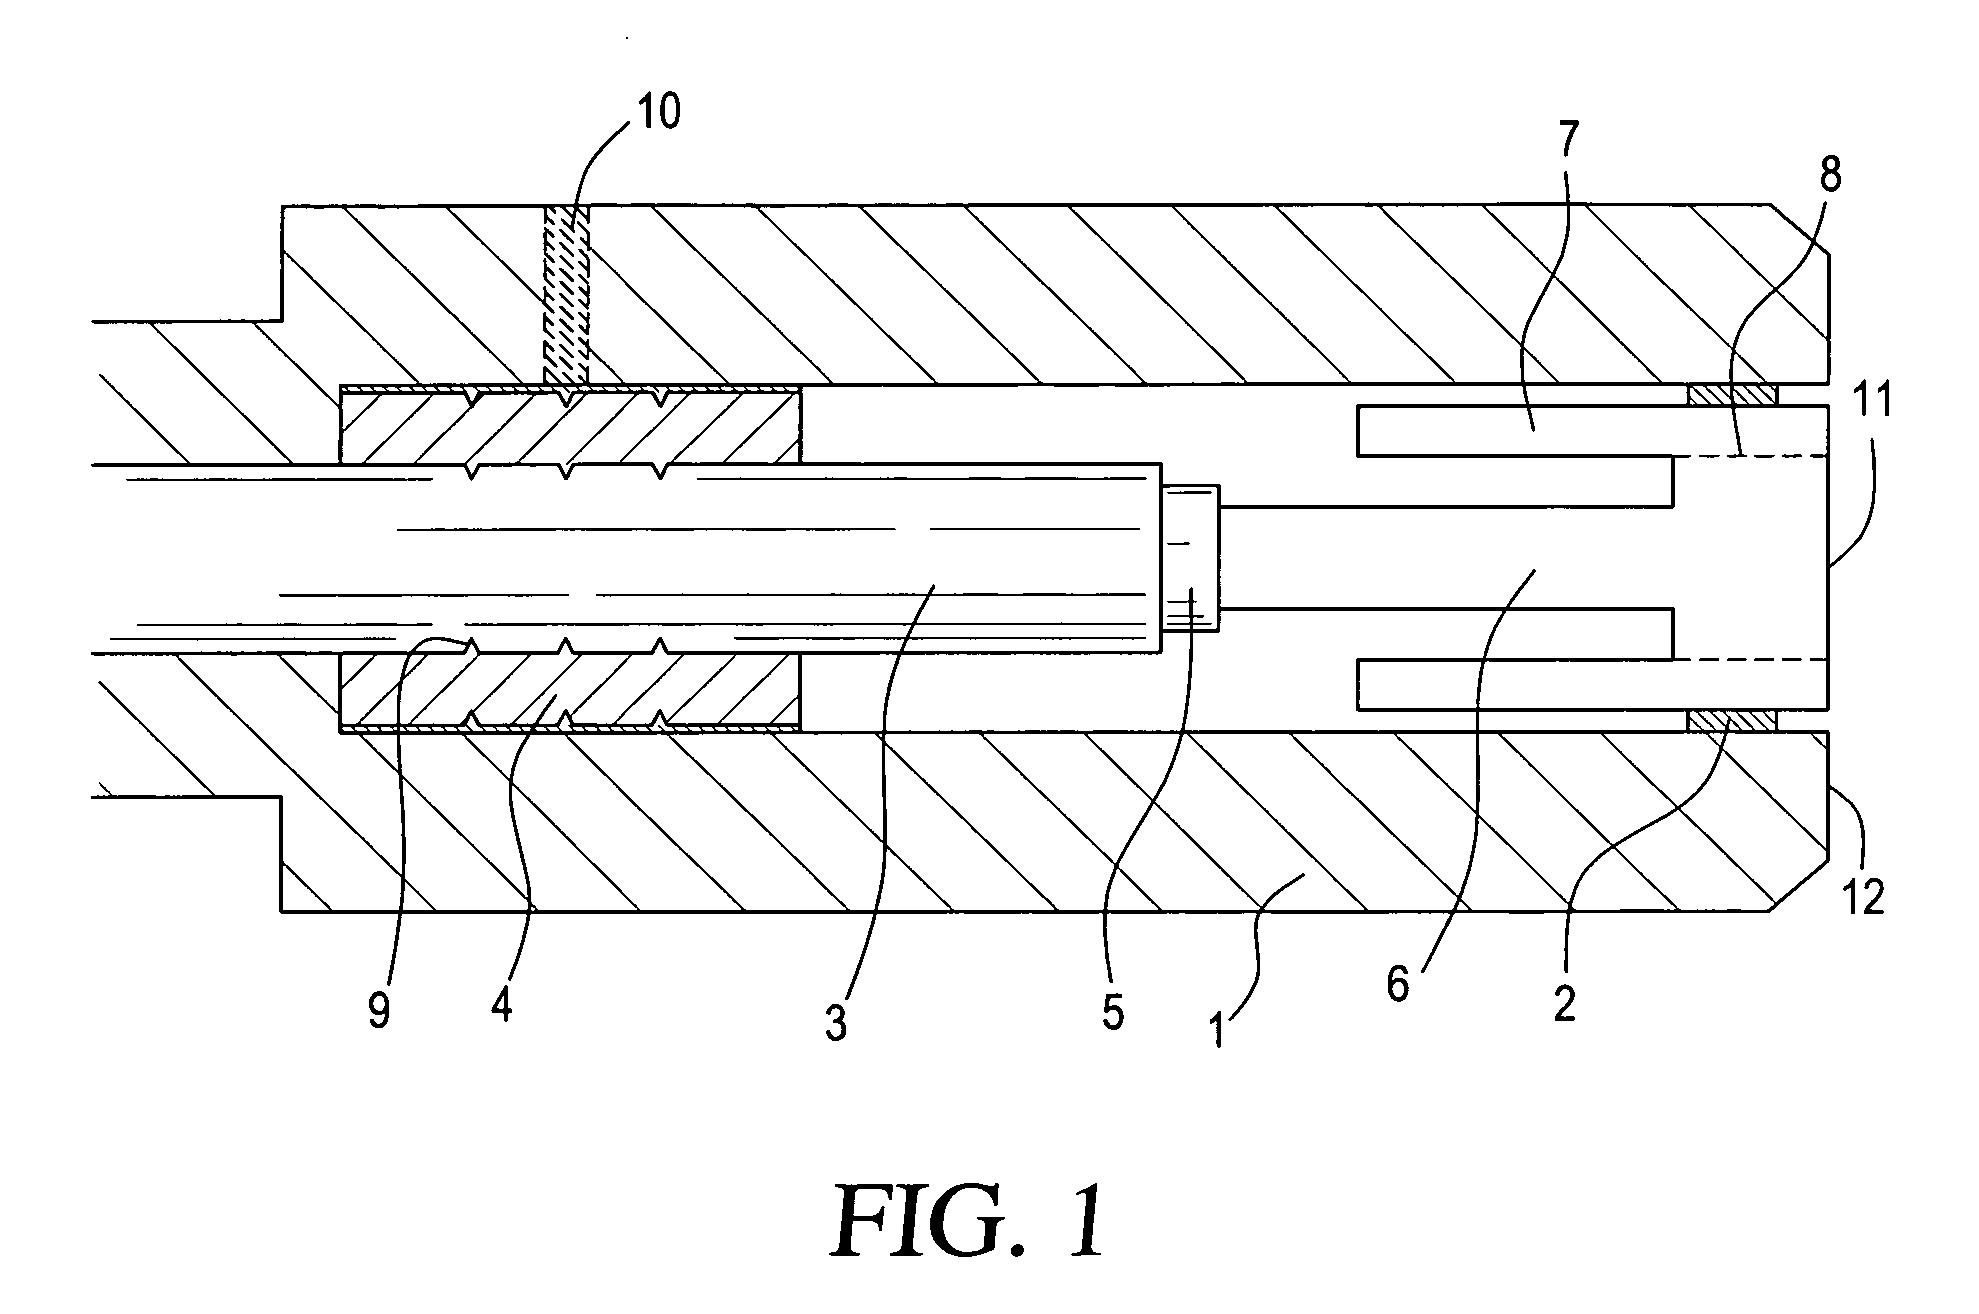 Fiber optic connector for coupling laser energy into small core fibers, and termination method therefor